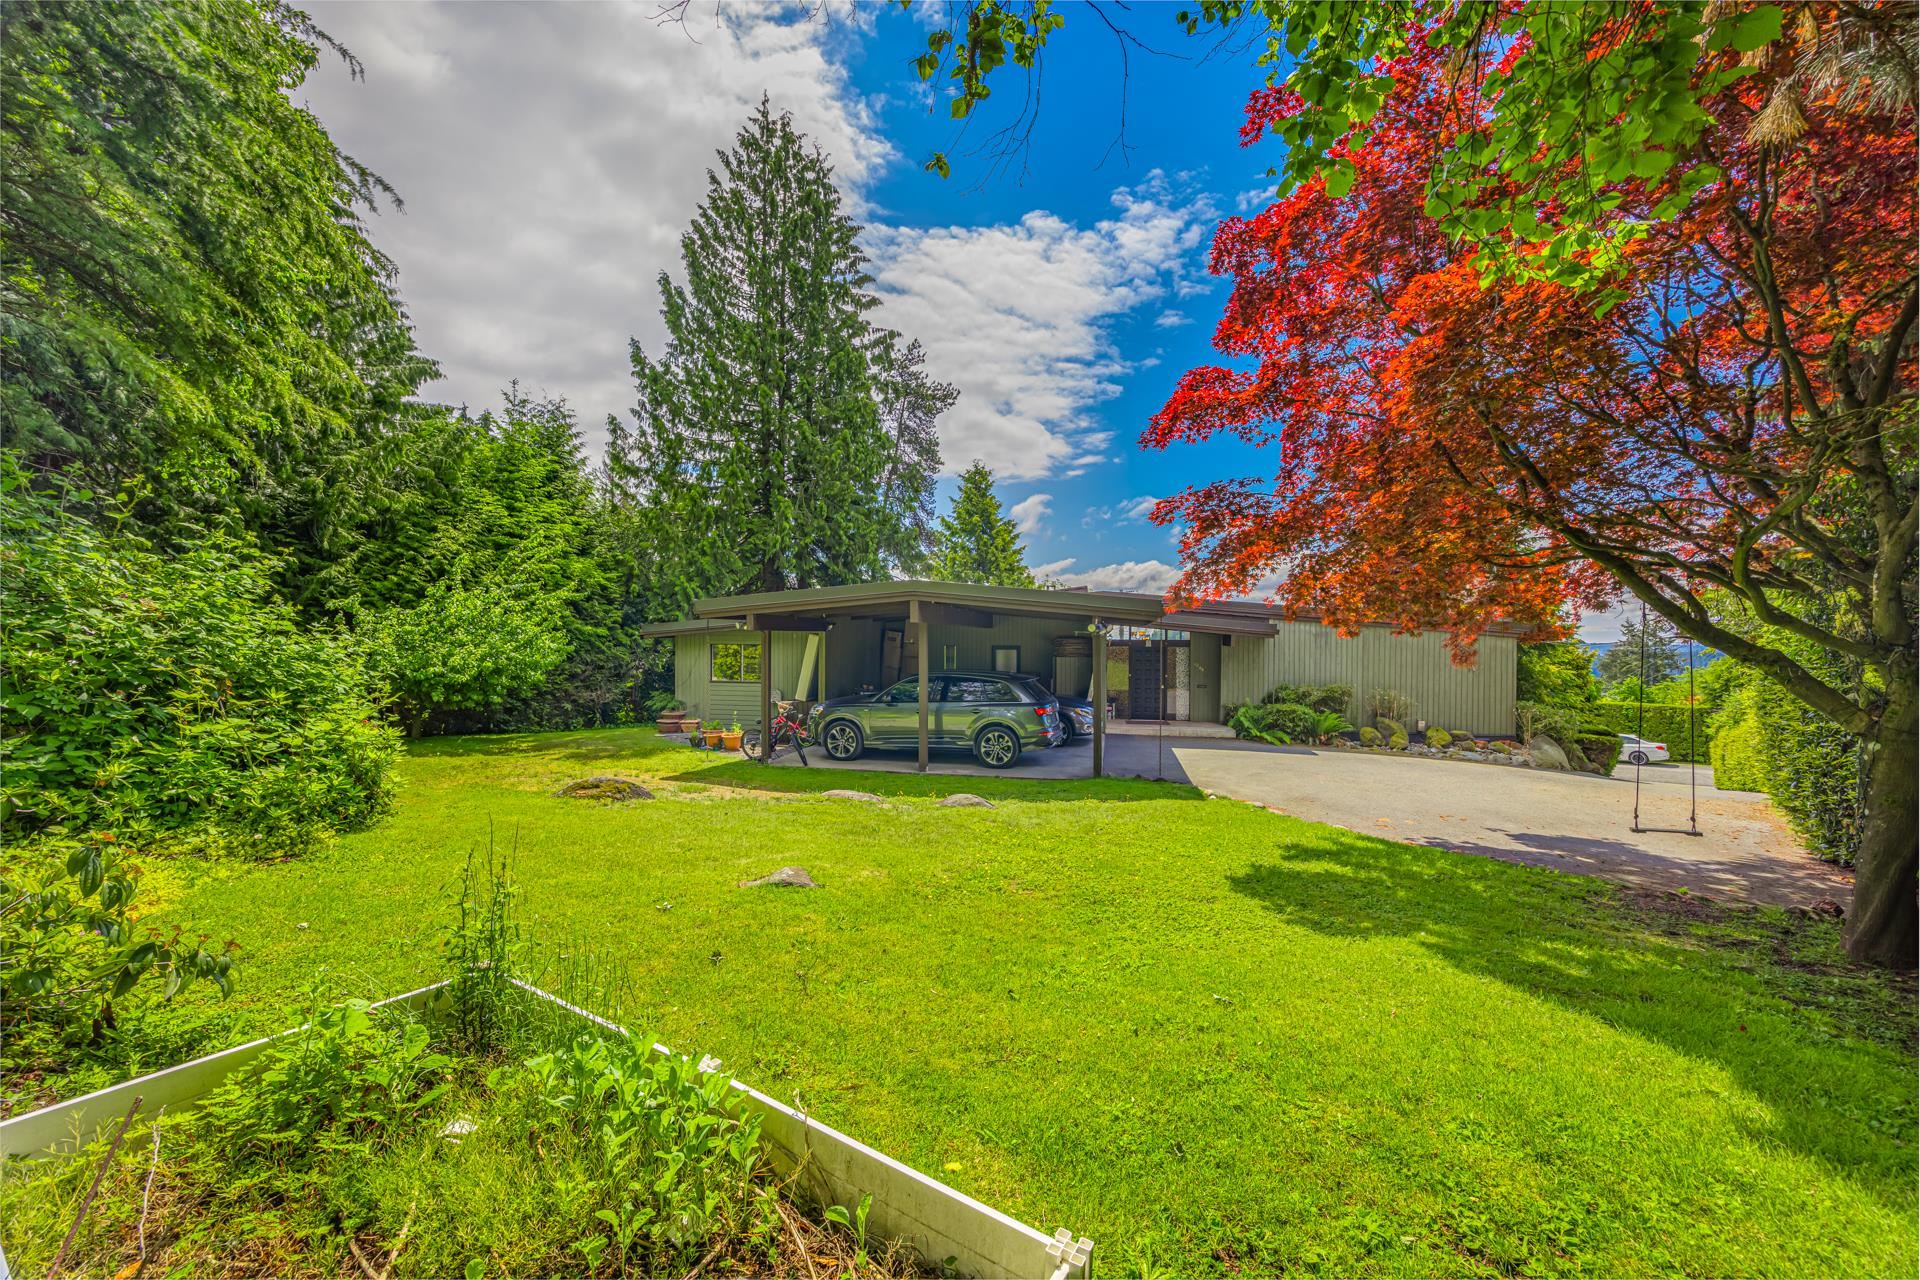 Listing image of 1085 PALMERSTON AVENUE